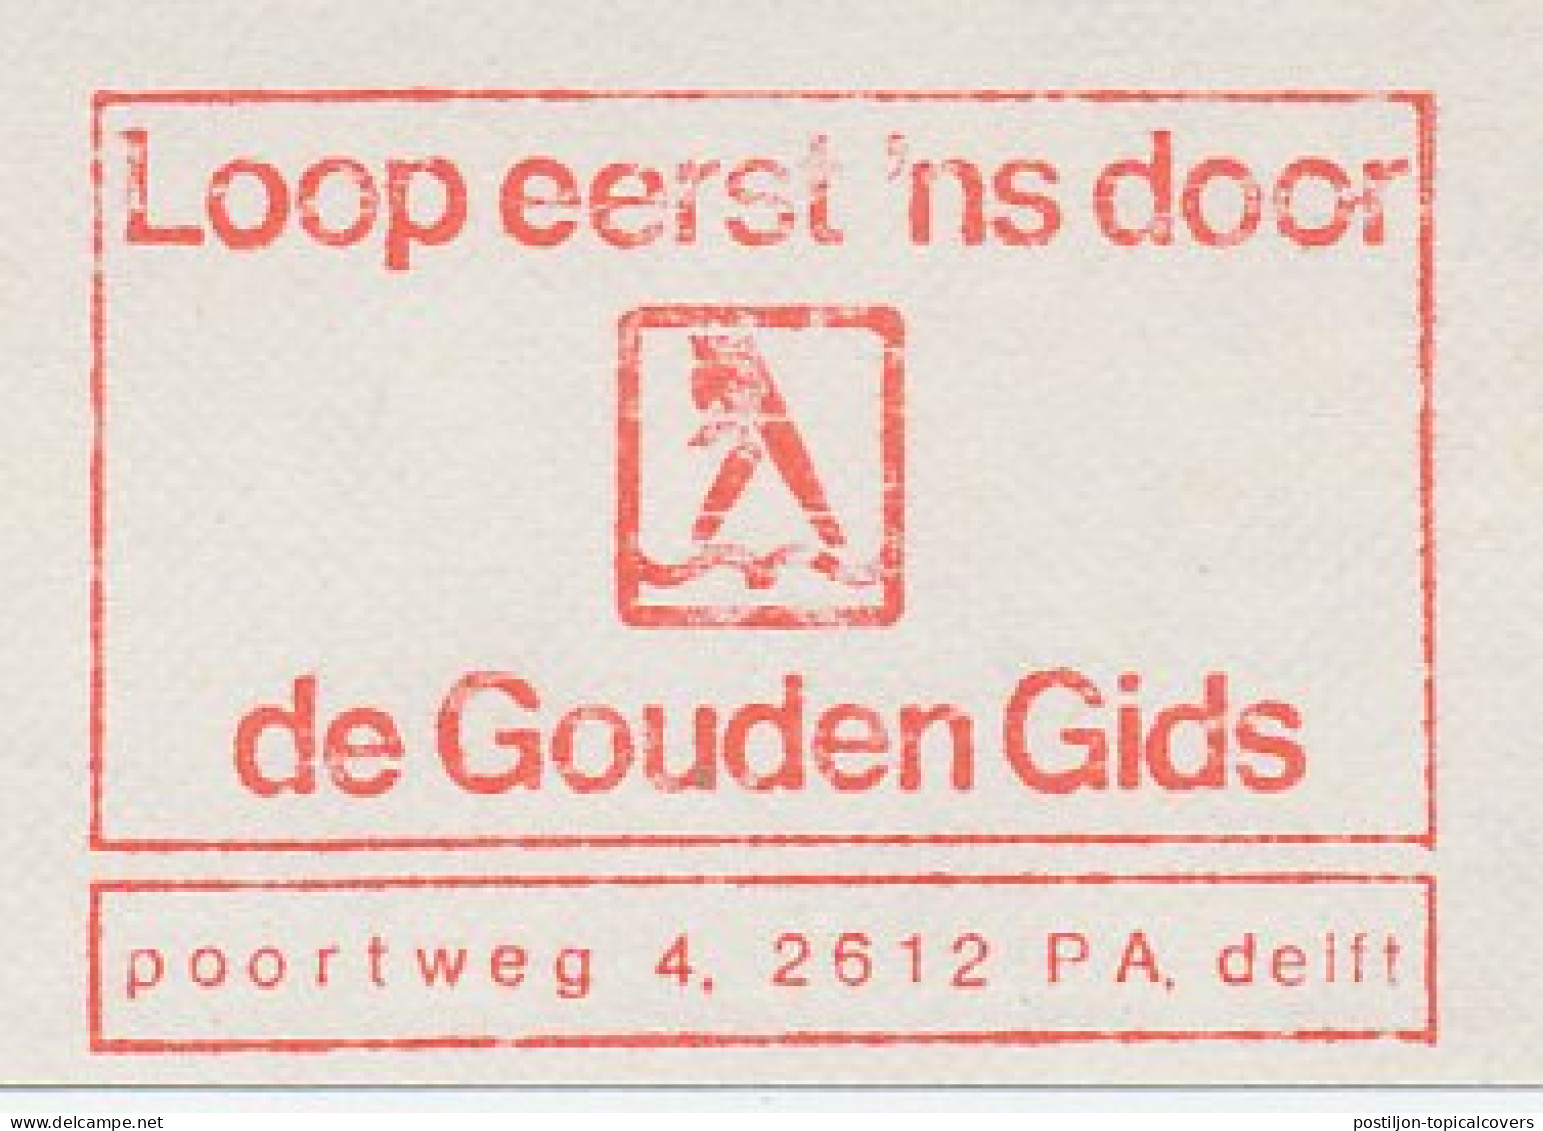 Meter Cut Netherlands 1981 Yellow Pages - Unclassified